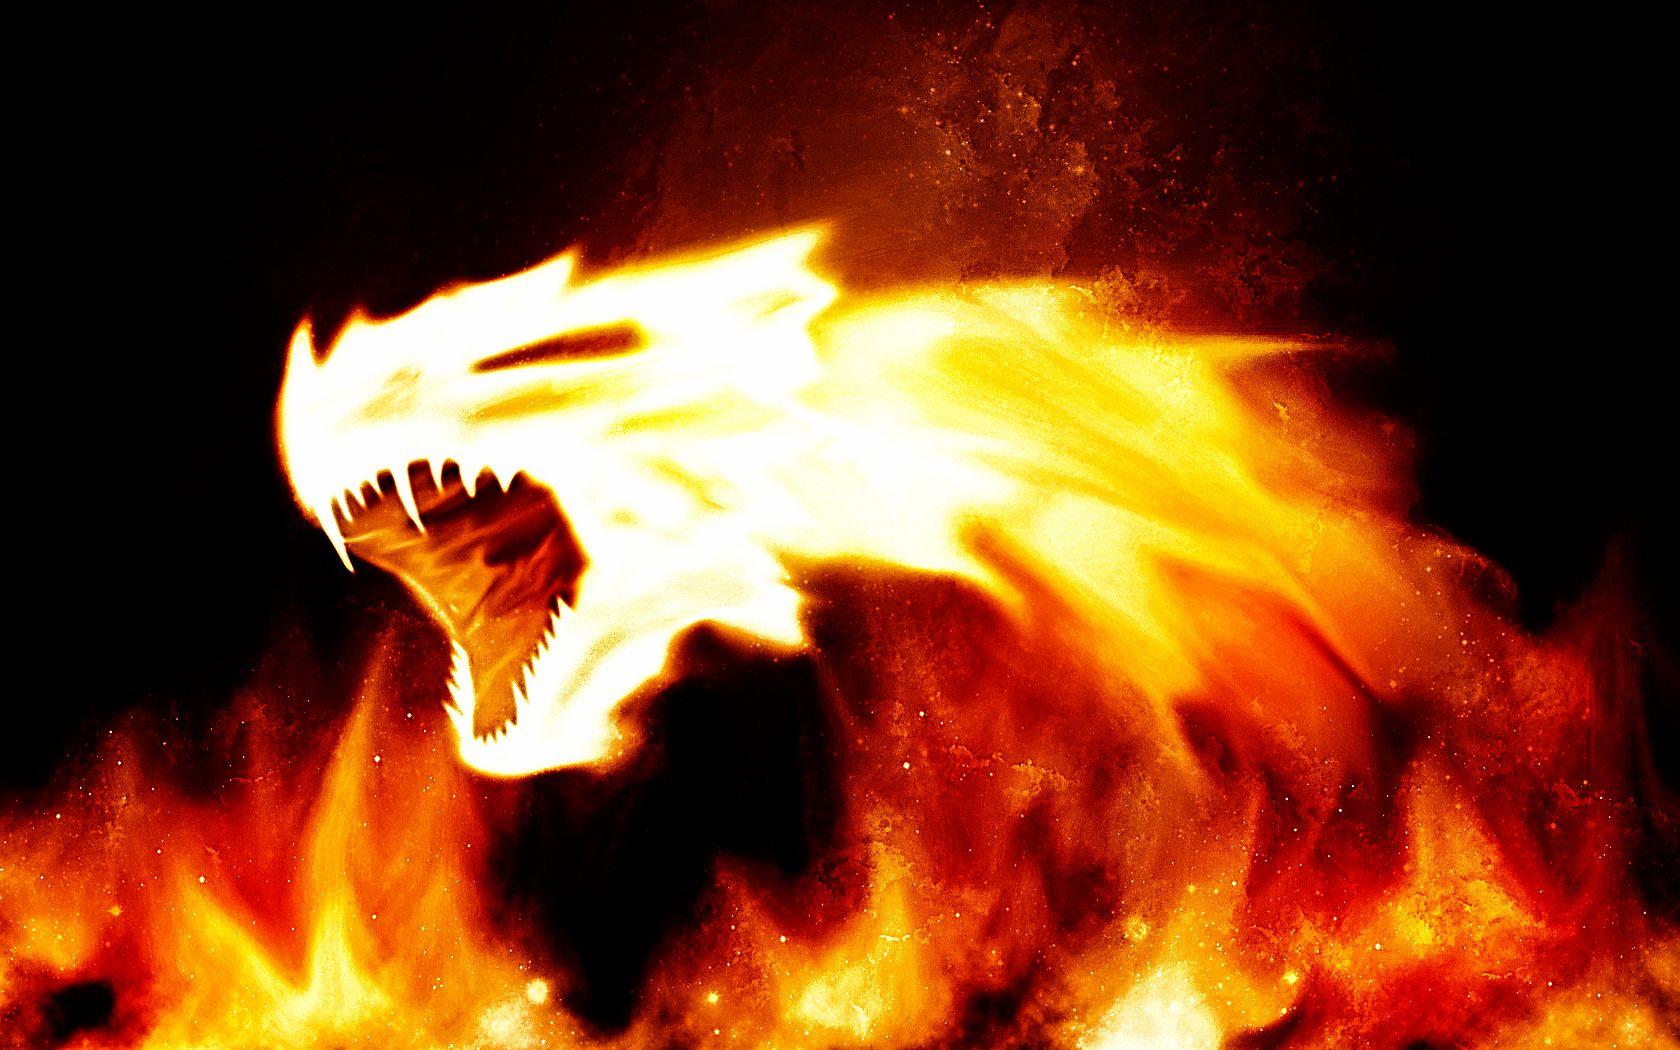 cool fire dragon pictures